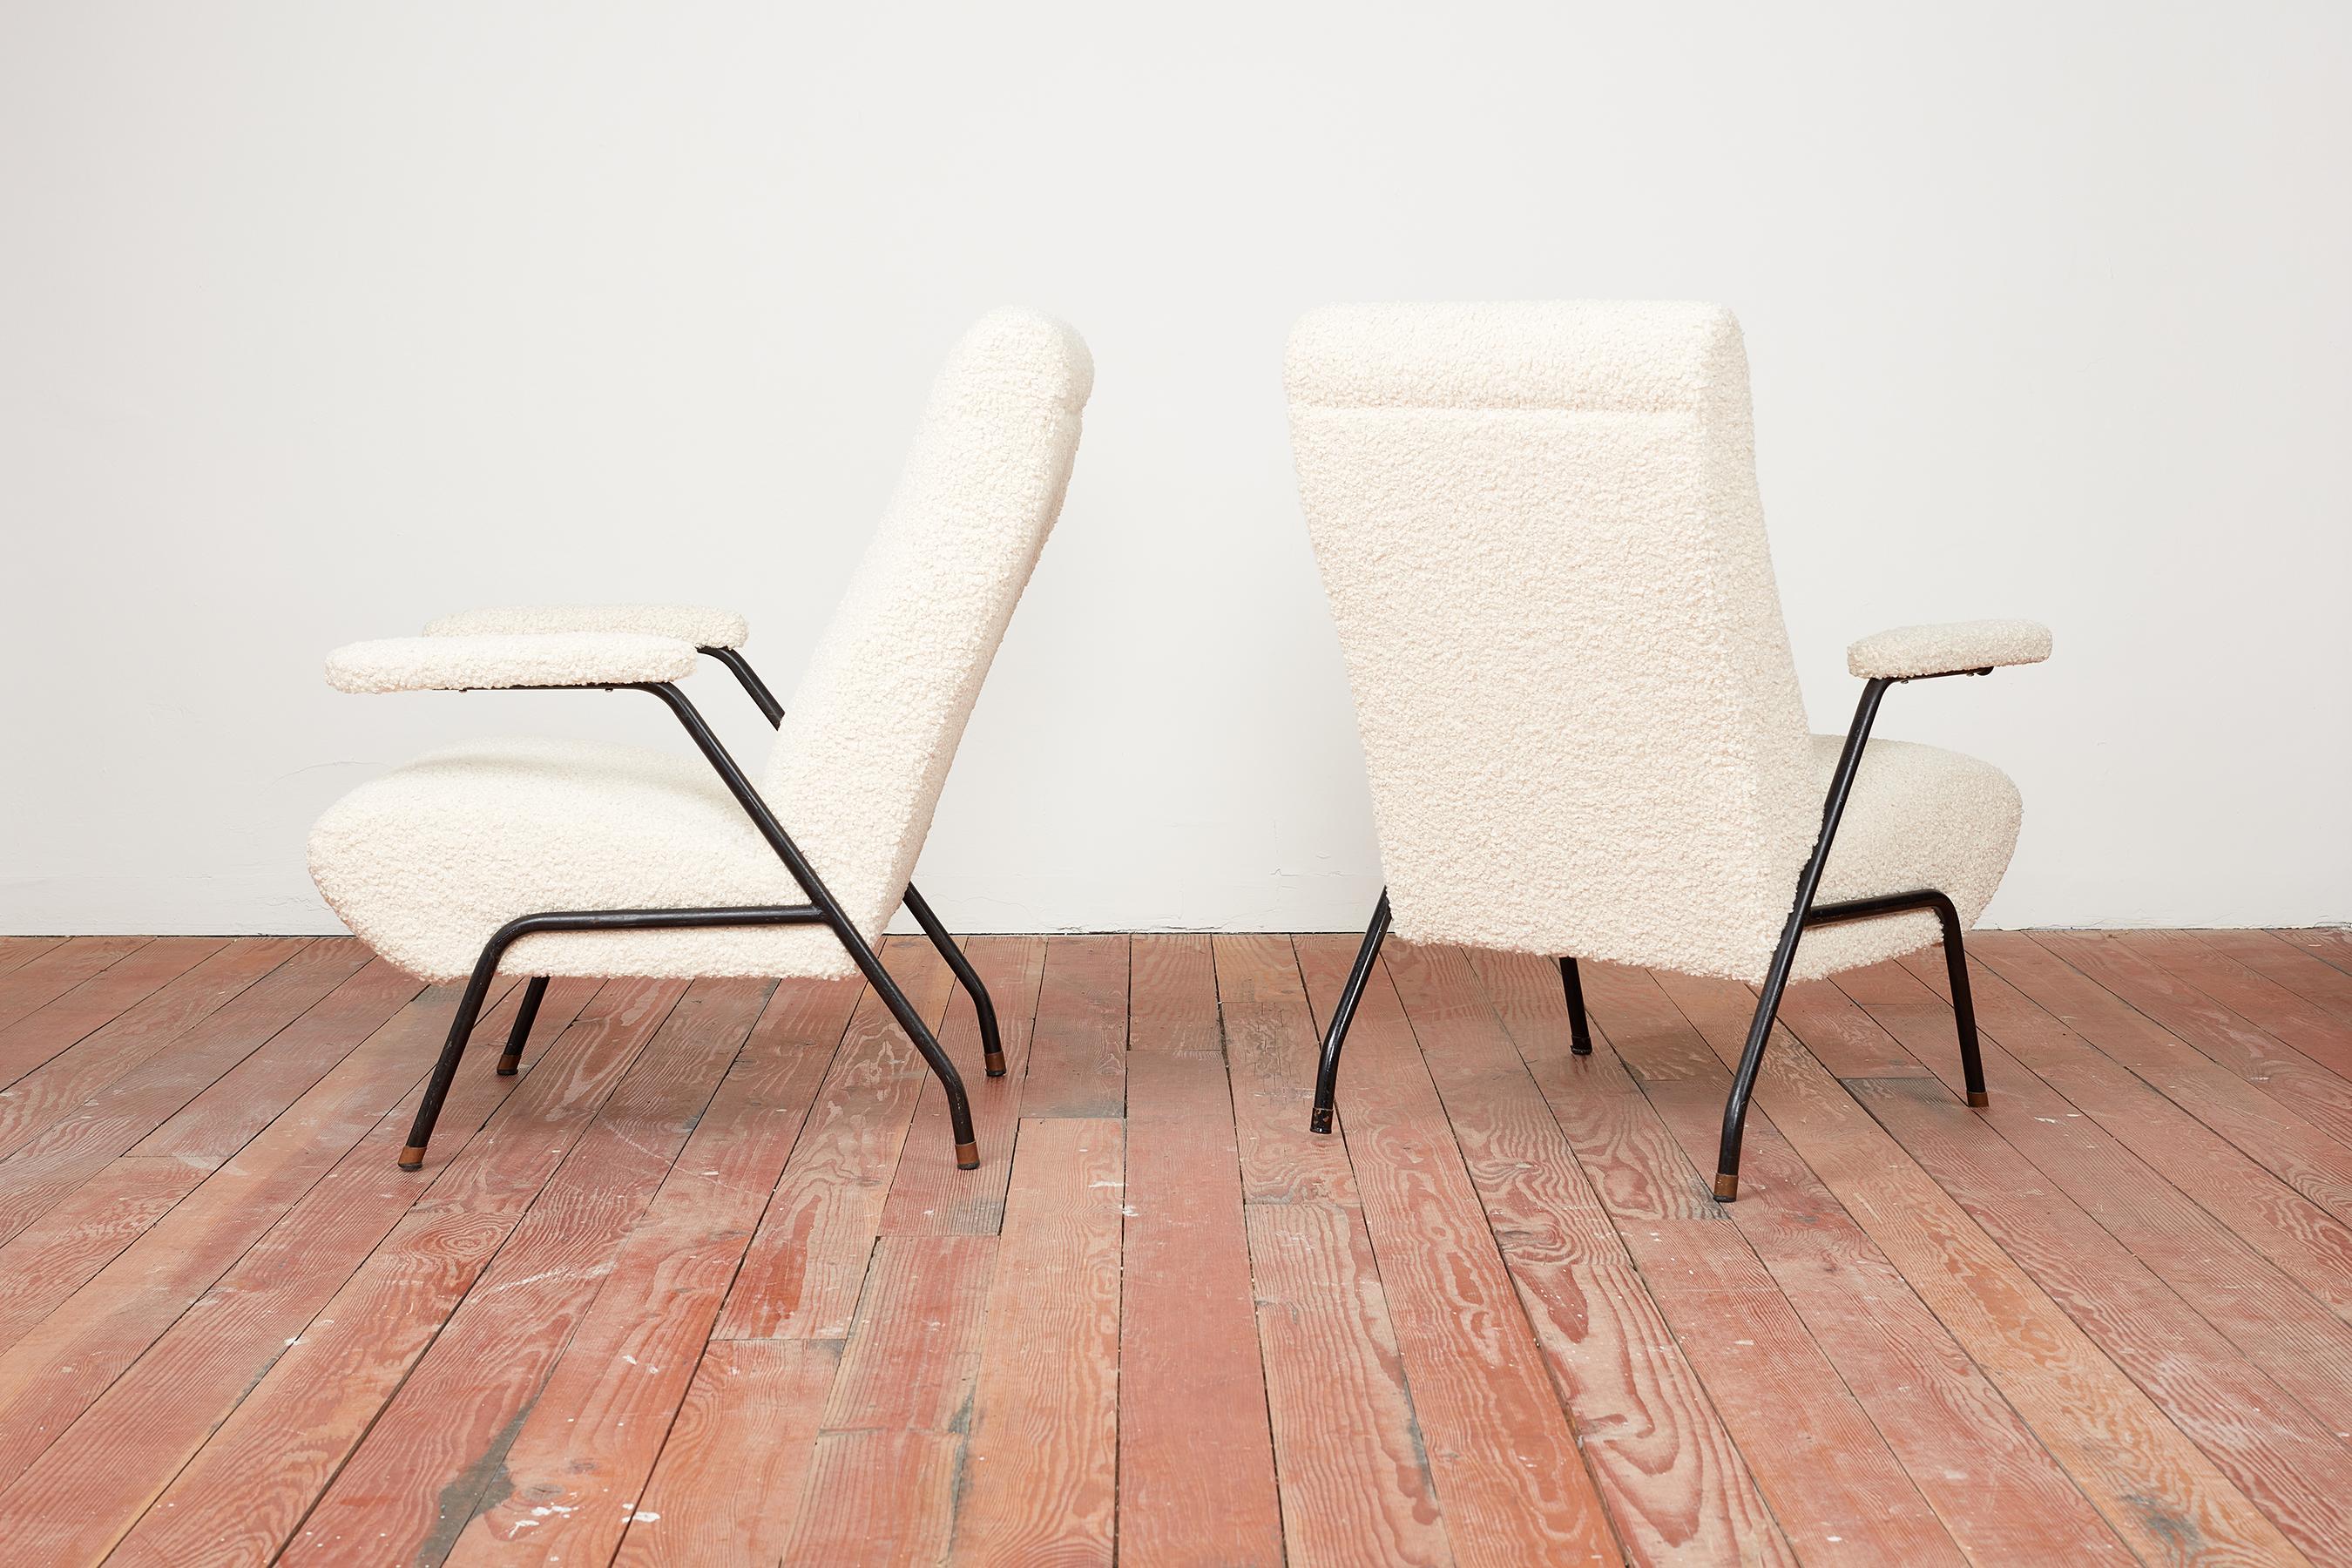 1950's Italian sculptural chairs newly upholstered in creamy white boucle.
Tubular black metal structure with sculptural shape
Floating arms and angular legs. 
Brass cap feet 
Great Italian design.

2 pairs available.